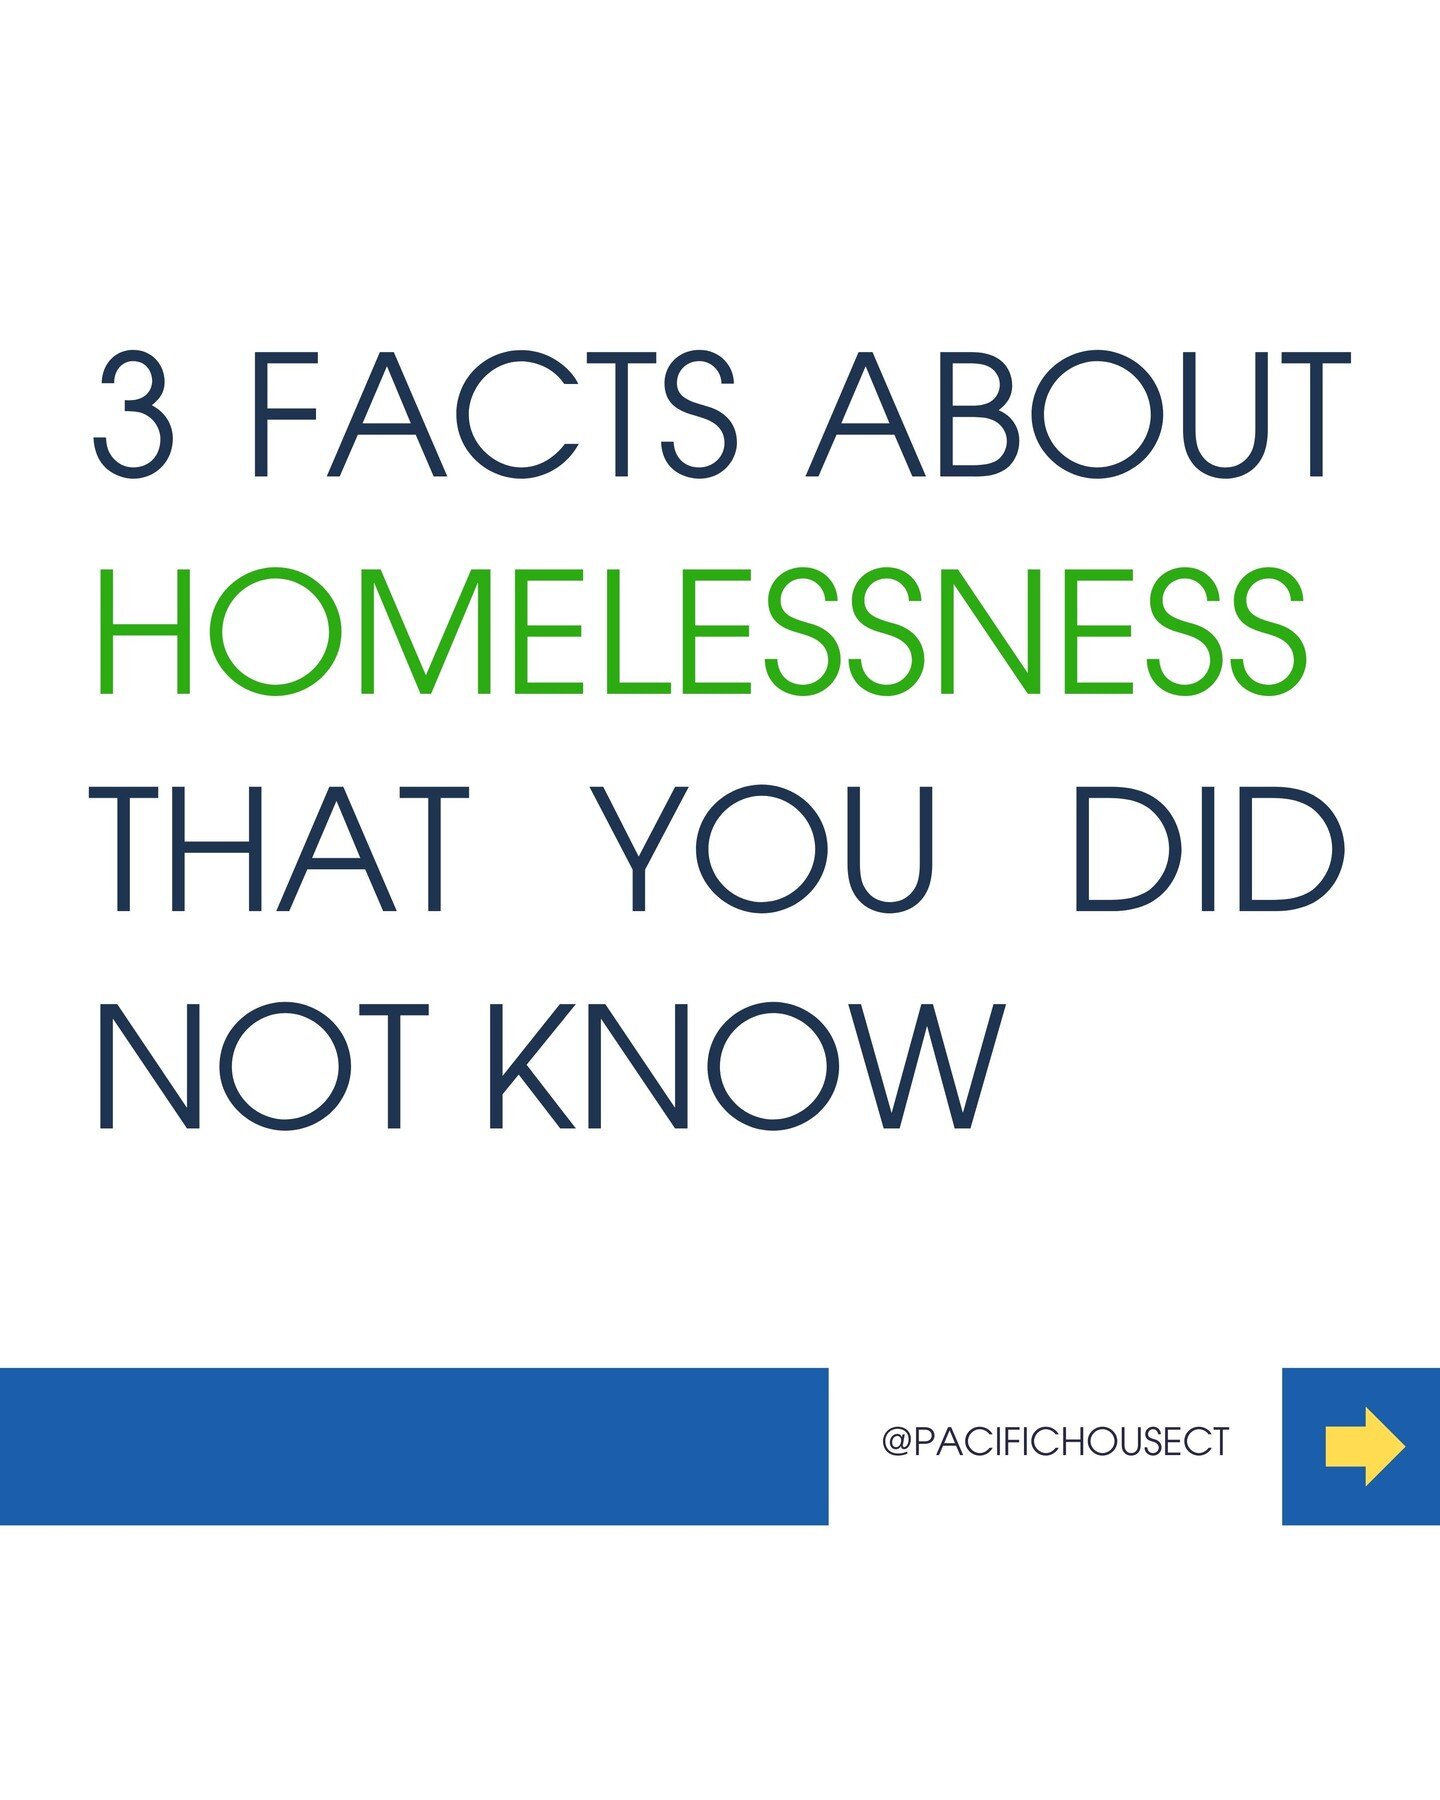 Did you know that homelessness affects the people who experience it and those around them? It can profoundly impact health, children, youth, and even economic consequences for entire communities.

So let's work together to create innovative solutions